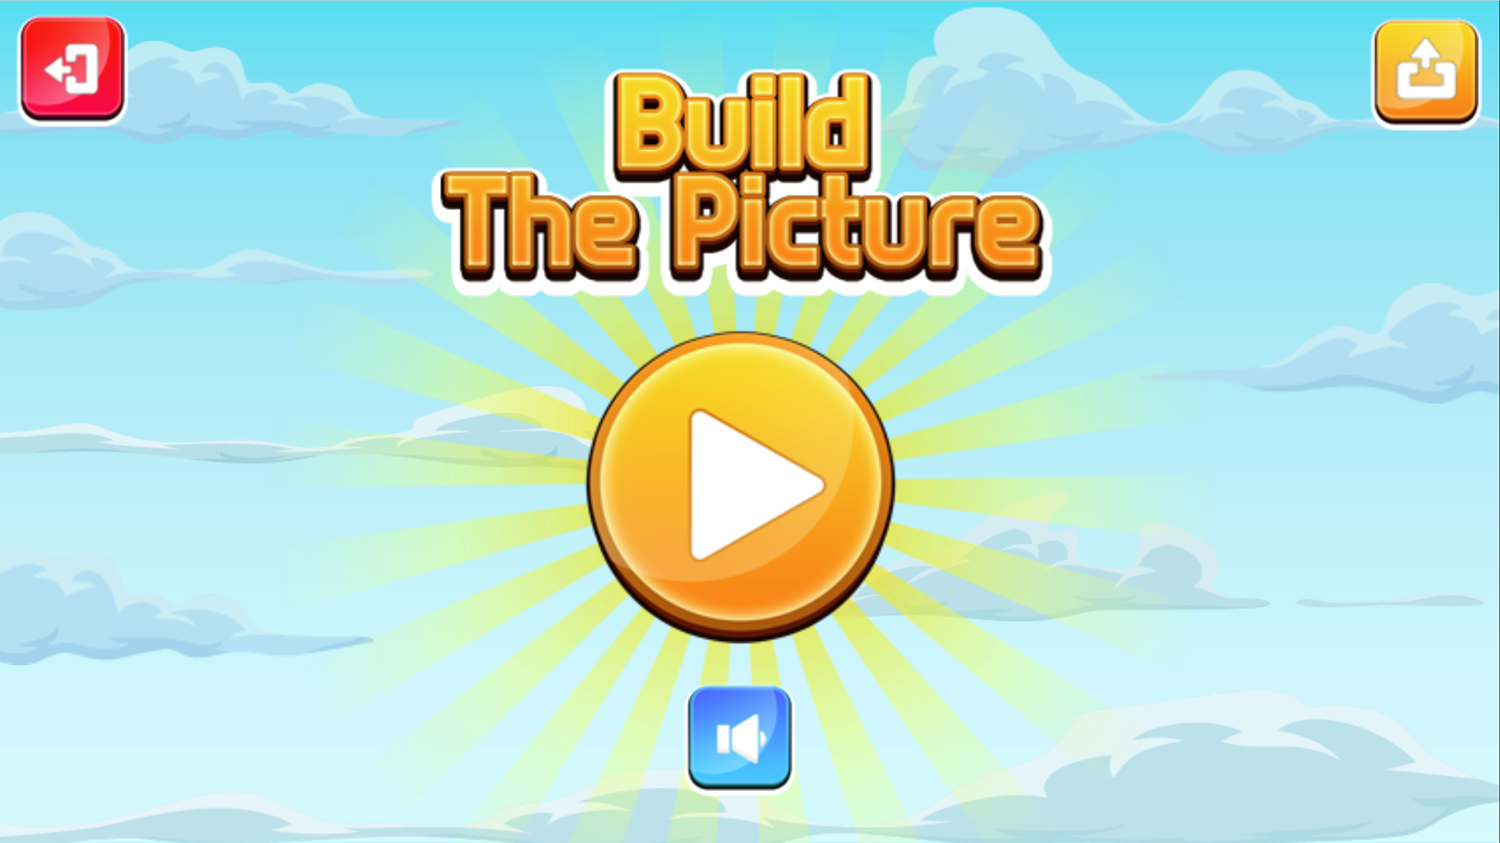 Build The Picture Game Welcome Screen Screenshot.